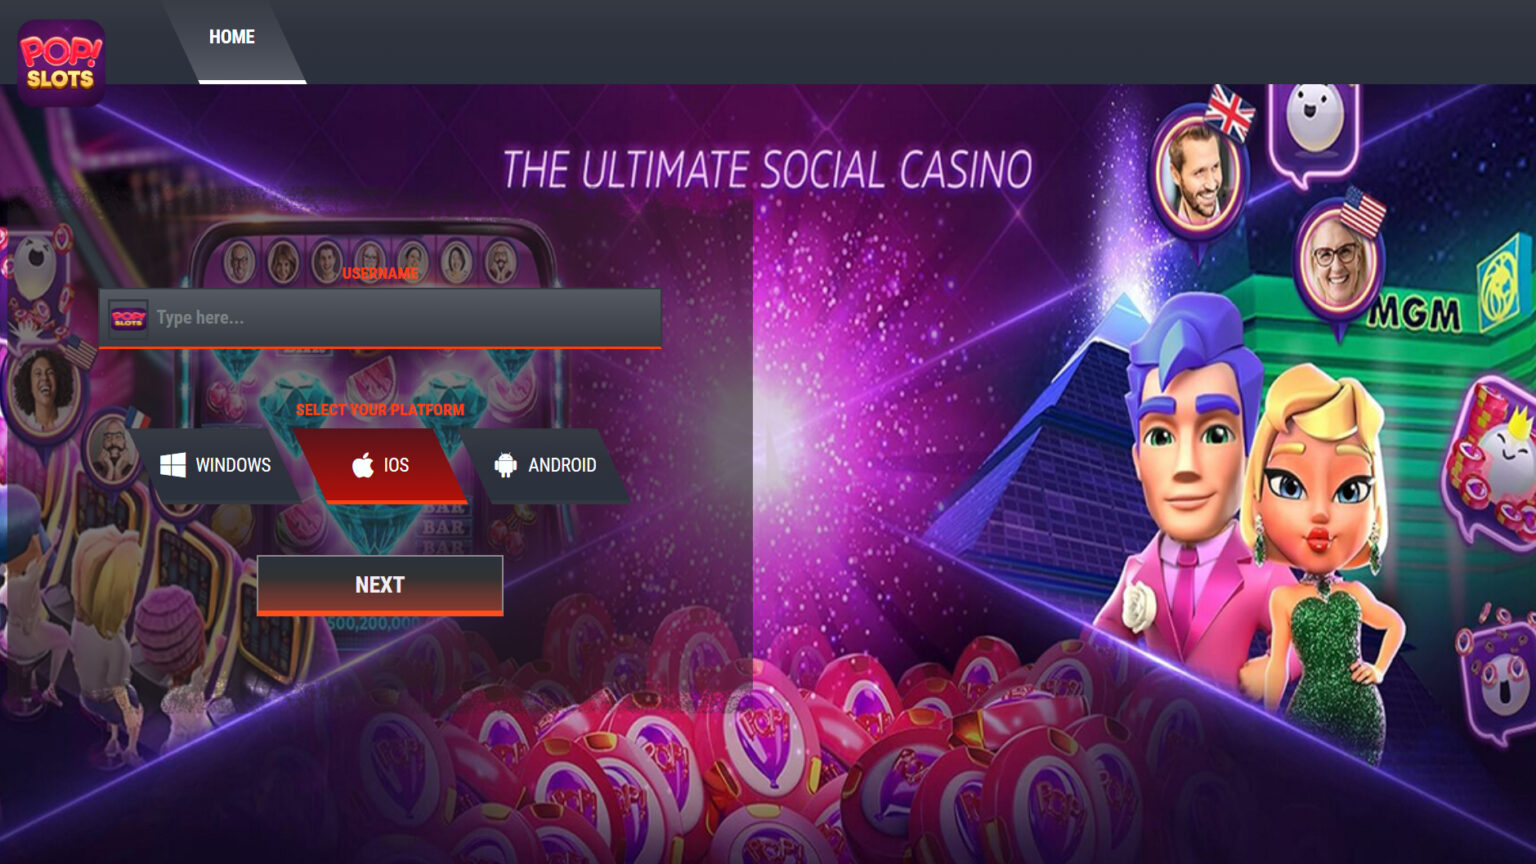 pop slots free chips mobile 2019